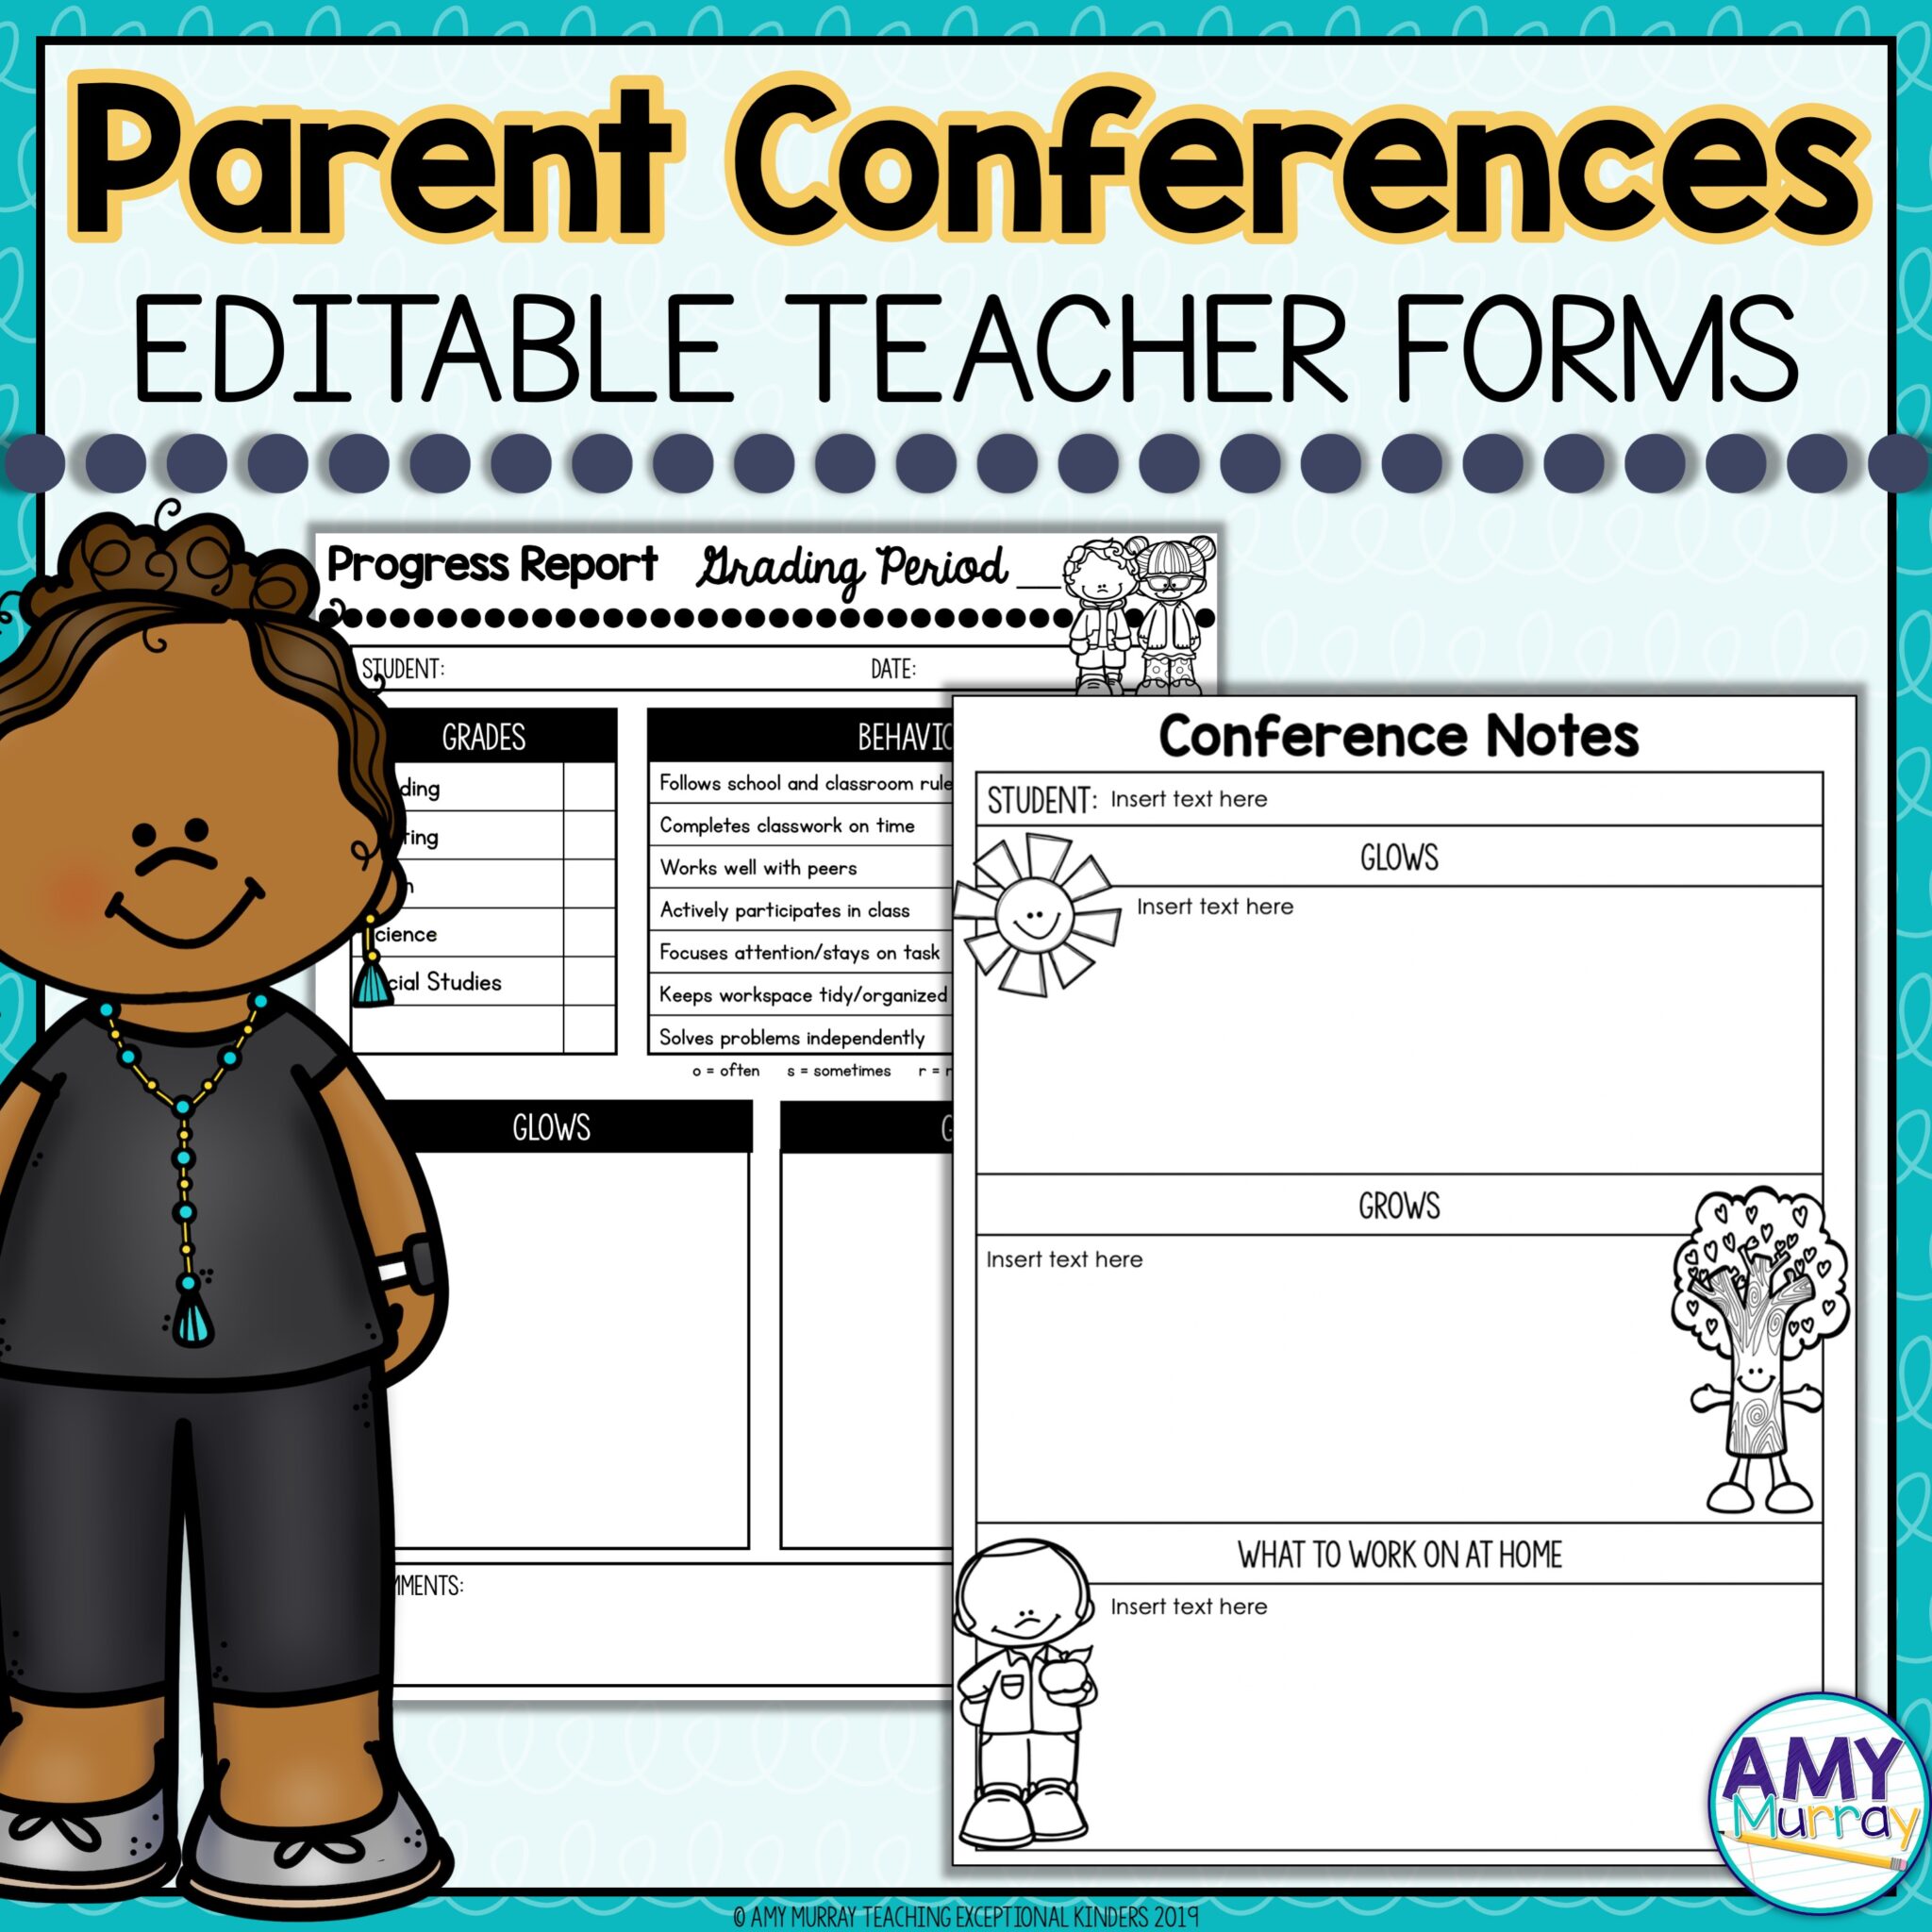 How To Use Google Forms For Parent Teacher Conferences